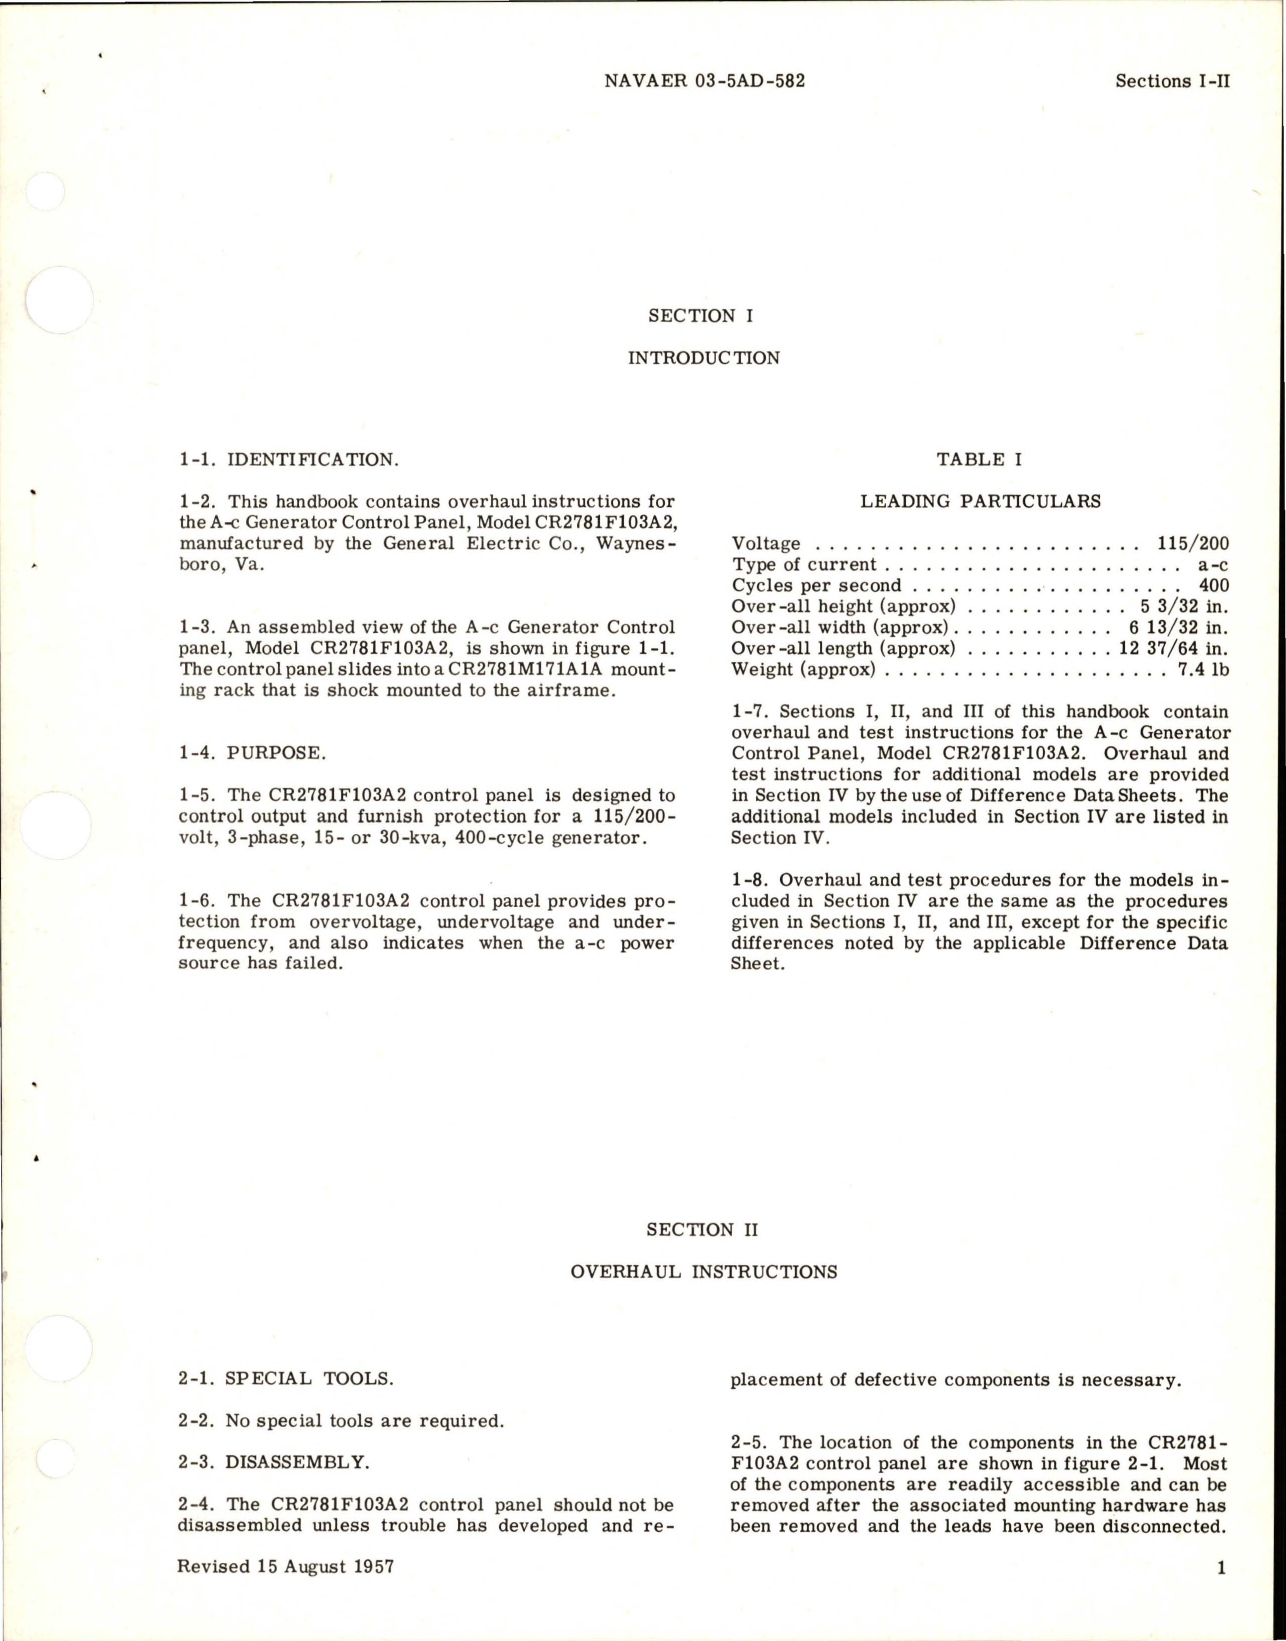 Sample page 5 from AirCorps Library document: Overhaul Instructions for AC Generator Control Panel - Models CR2781F103A2 and CR2781F103B1